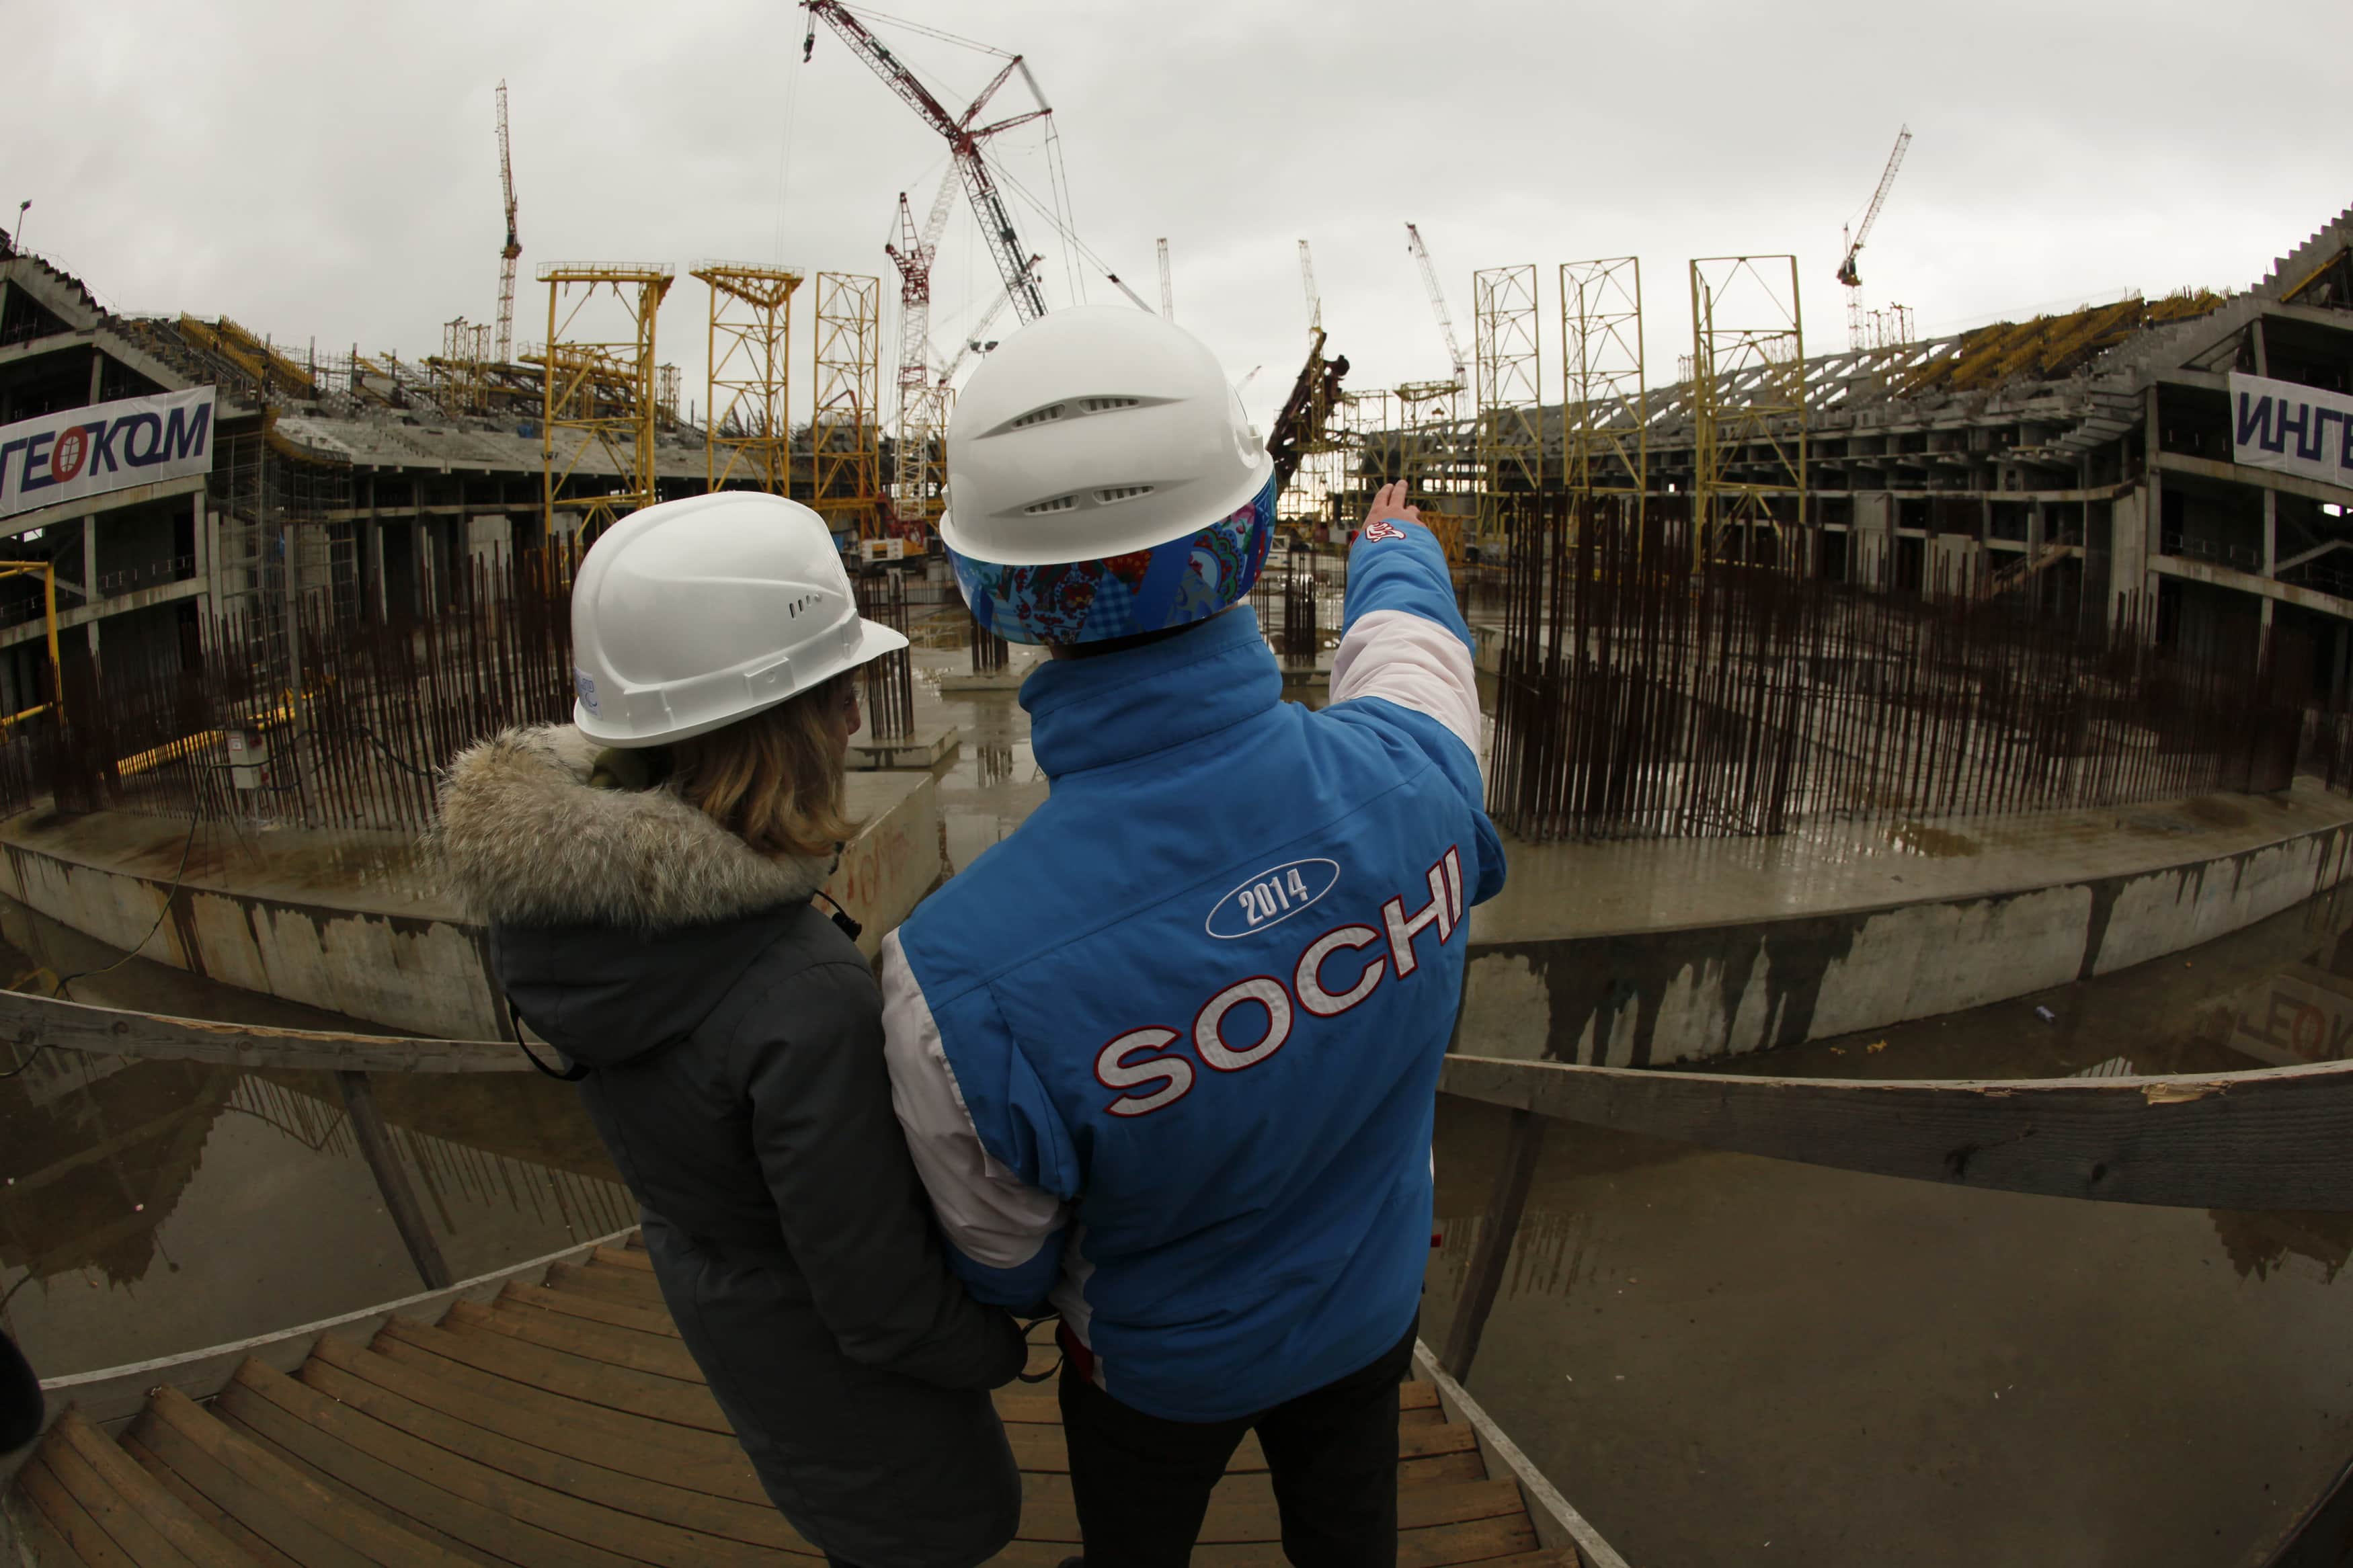 A volunteer shows a journalist the facilities of the Olympic stadium "Fisht" during an organized tour of the construction sites for the Olympic venues in Sochi, 10 February 2012., REUTERS/Wolfgang Rattay